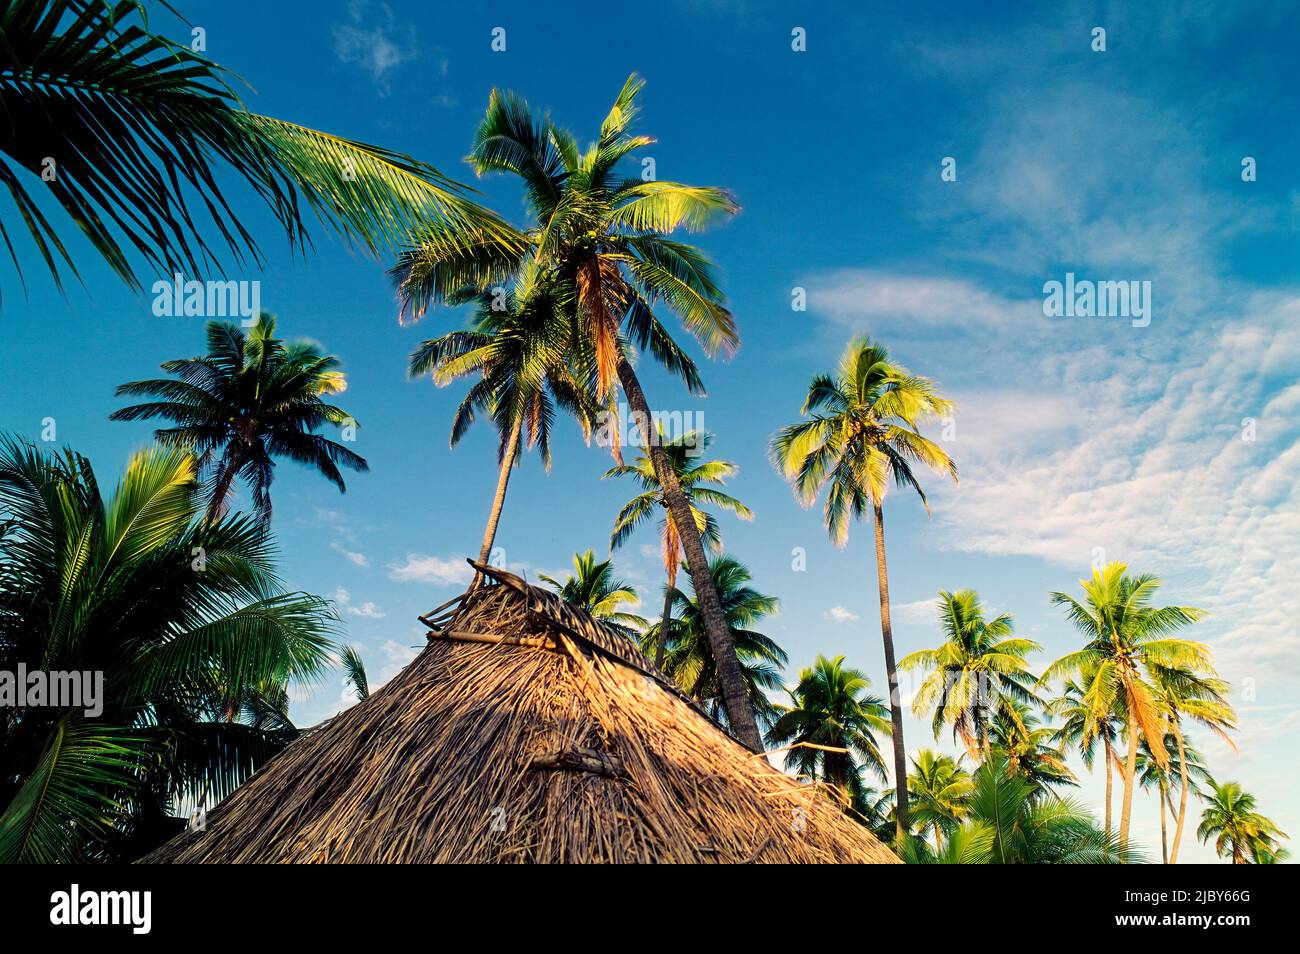 Traditional Fijian Hut with thatched roof among palm trees and blue sky above Stock Photo